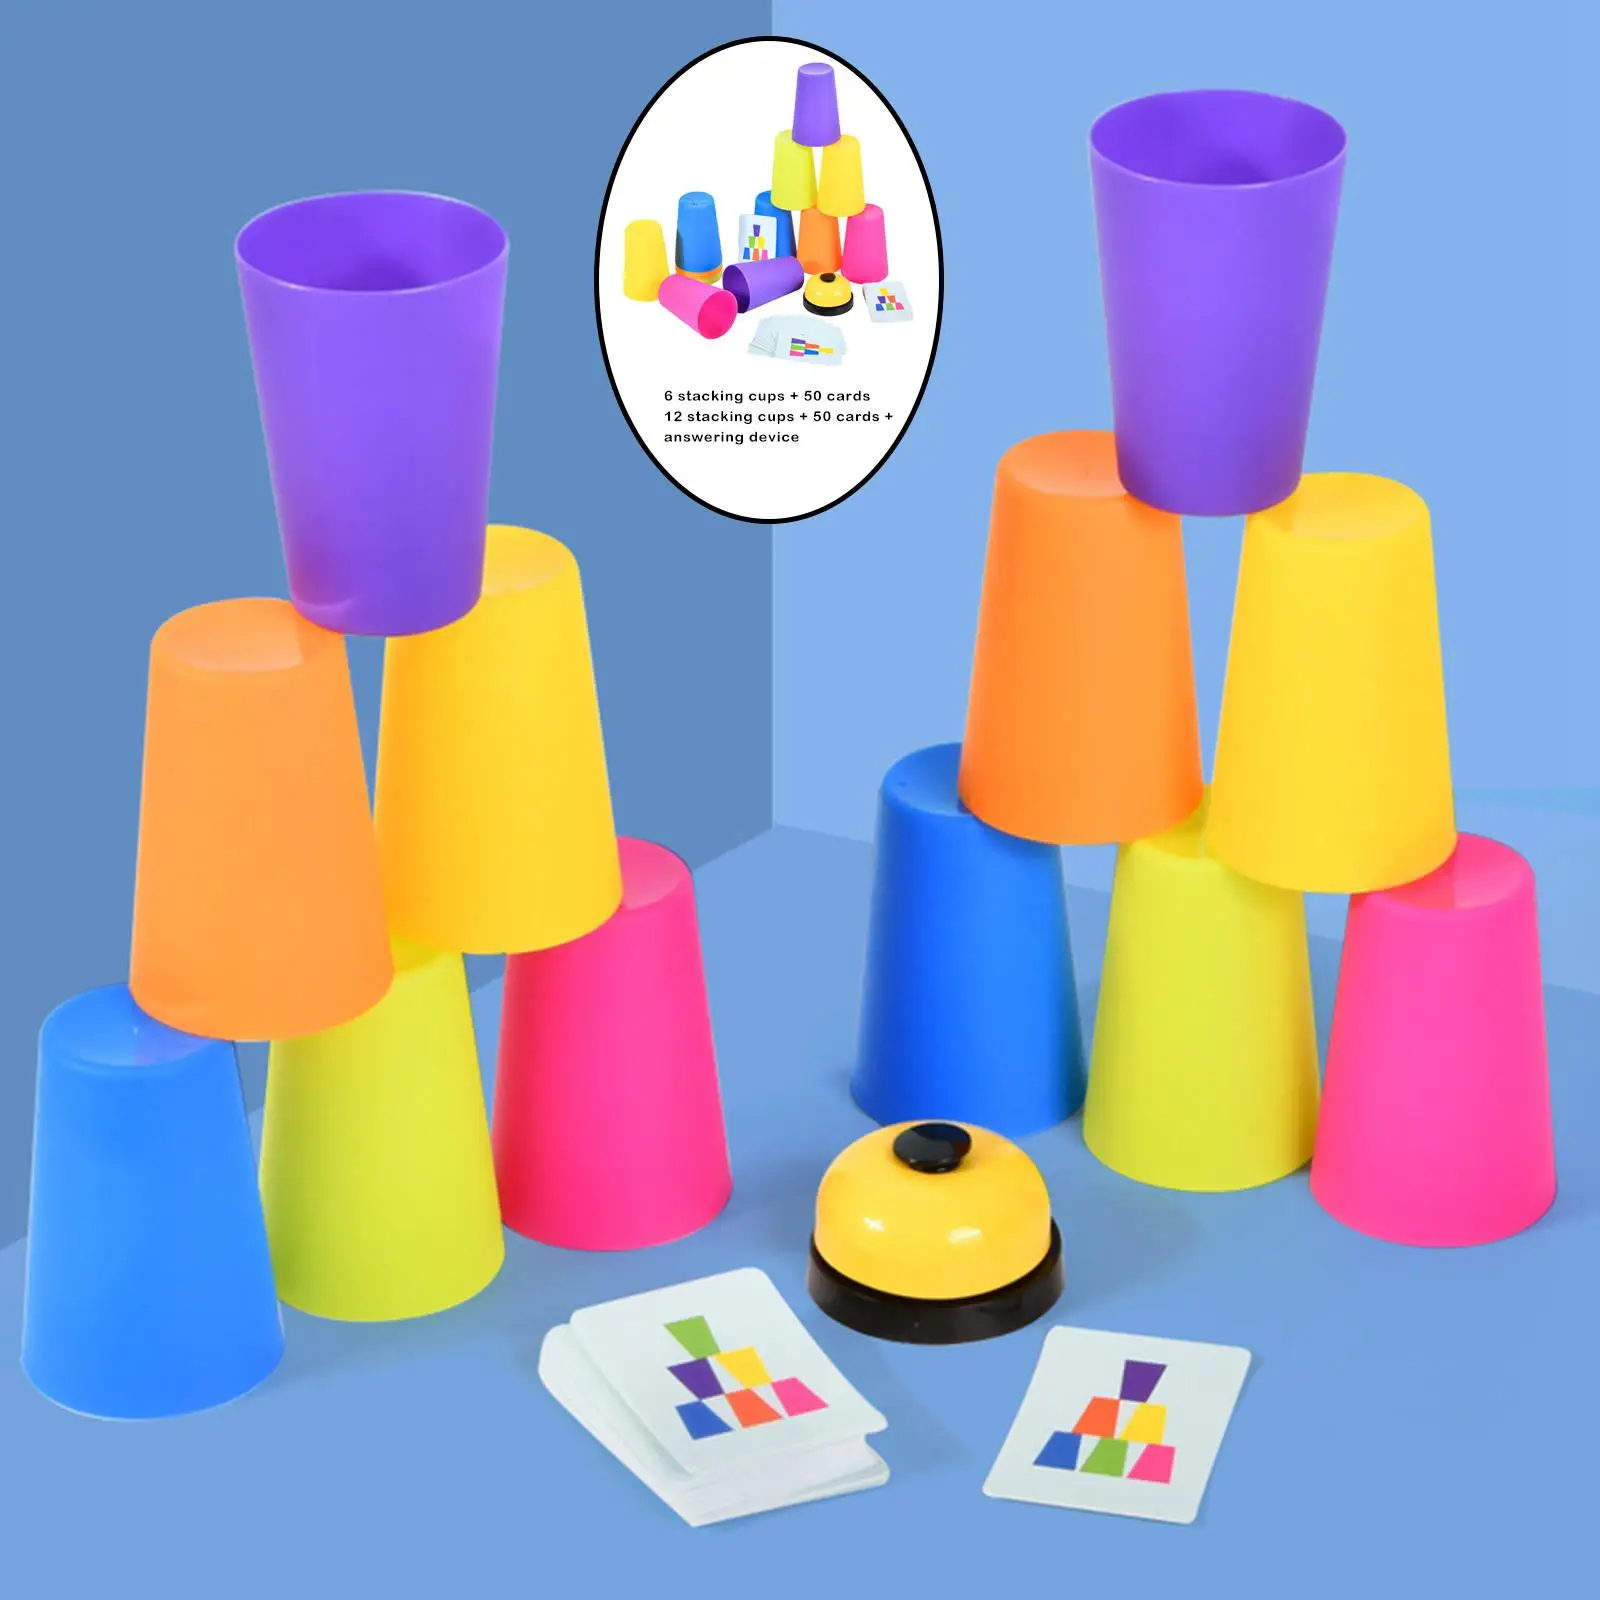 Baby Stacking Toy Training Game Learning Baby Toys for Toddlers Kids Gifts